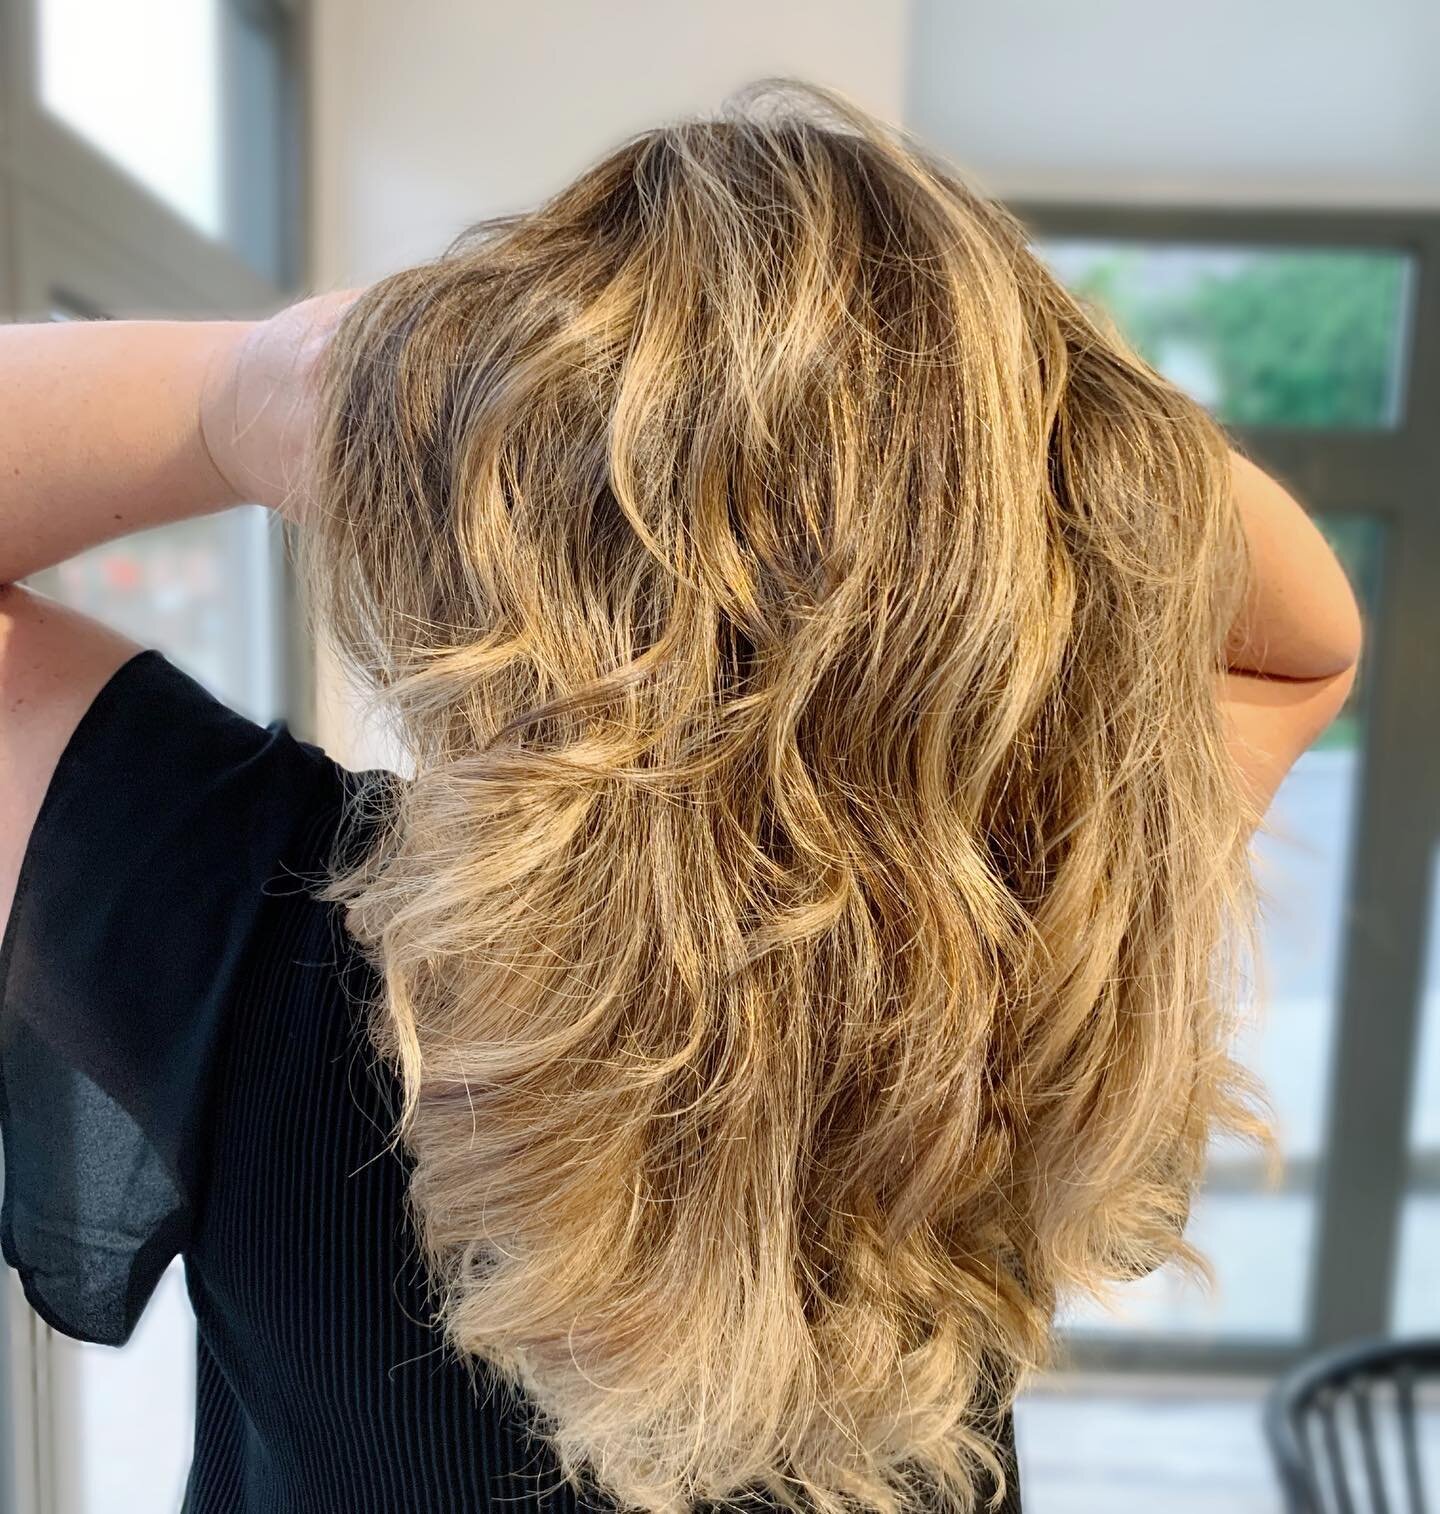 The 90&rsquo;s are calling ☎️ 
Big fluffy hair, has it every really gone out of style? 
.
@megs_aura 
#bighairdontcare #90shair #redkencanada #redken #balayage #flashliftbonderinside #shadeseqgloss #sidepart #brockville #1000islands #brockvillehairsa